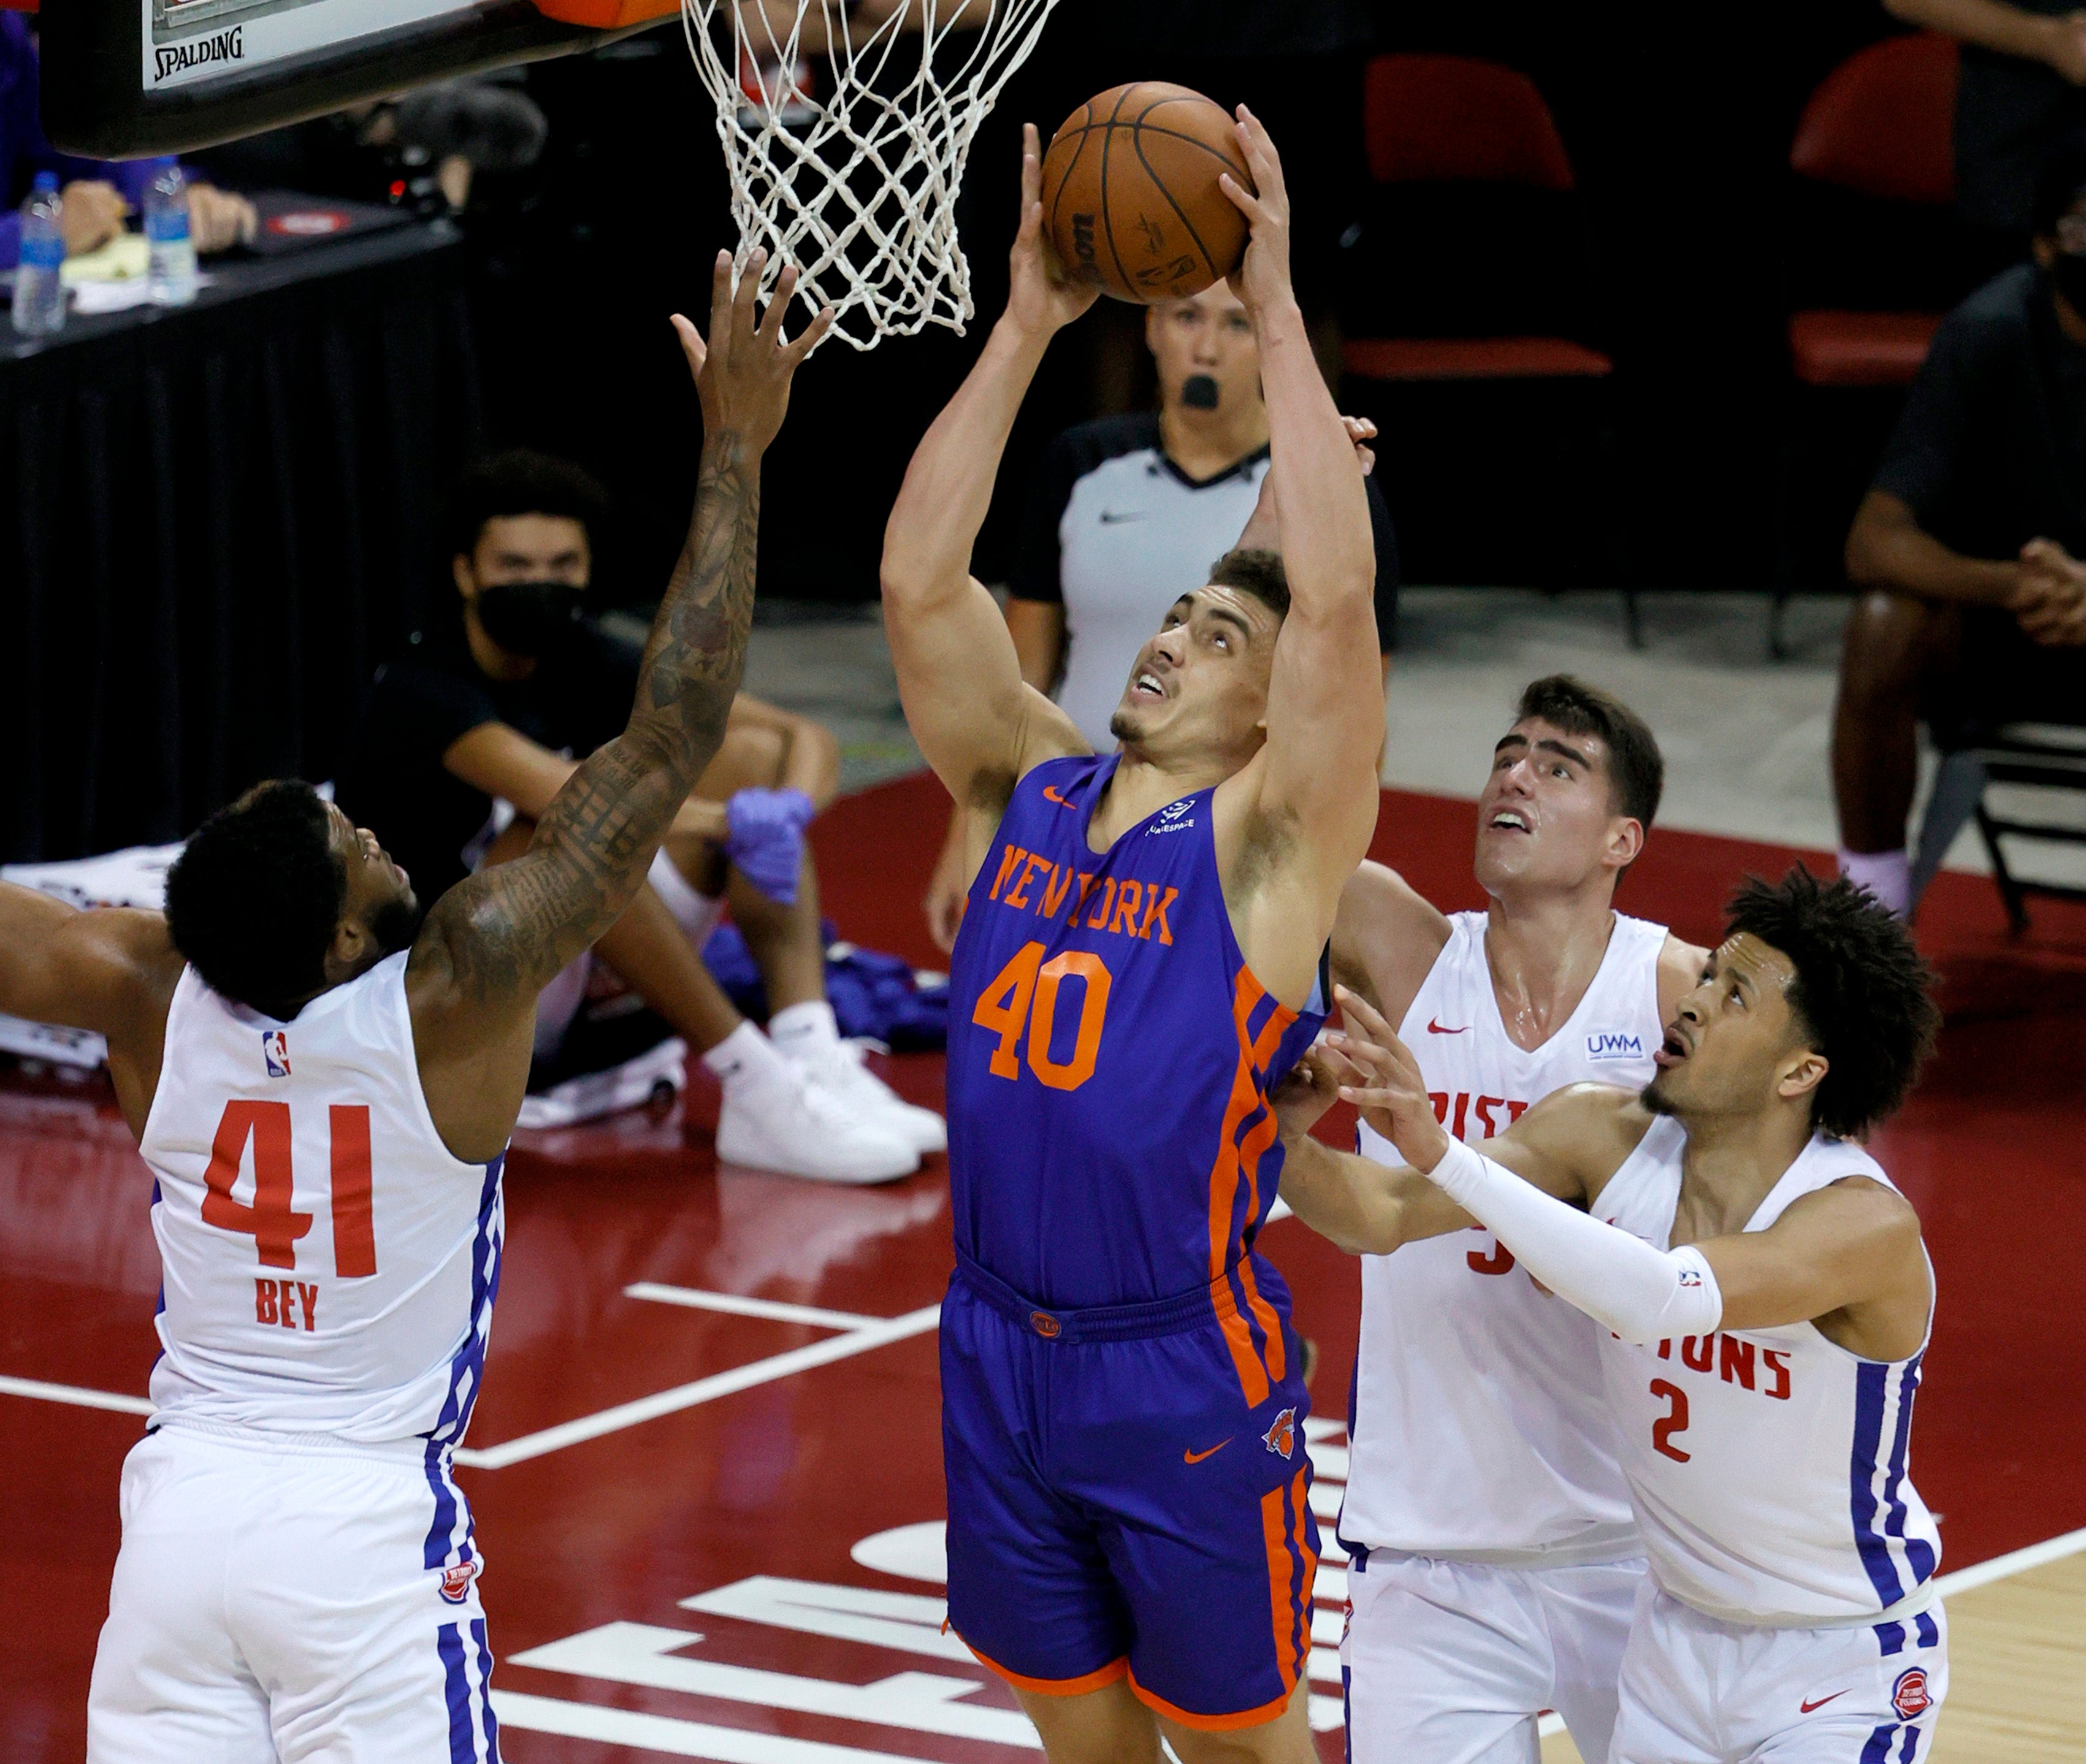 Reid Travis of the New York Knicks shoots against Saddiq Bey, Luka Garzaz and Cade Cunningham of the Detroit Pistons during the 2021 NBA Summer League at the Thomas & Mack Center on 13 August 2021 in Las Vegas, Nevada